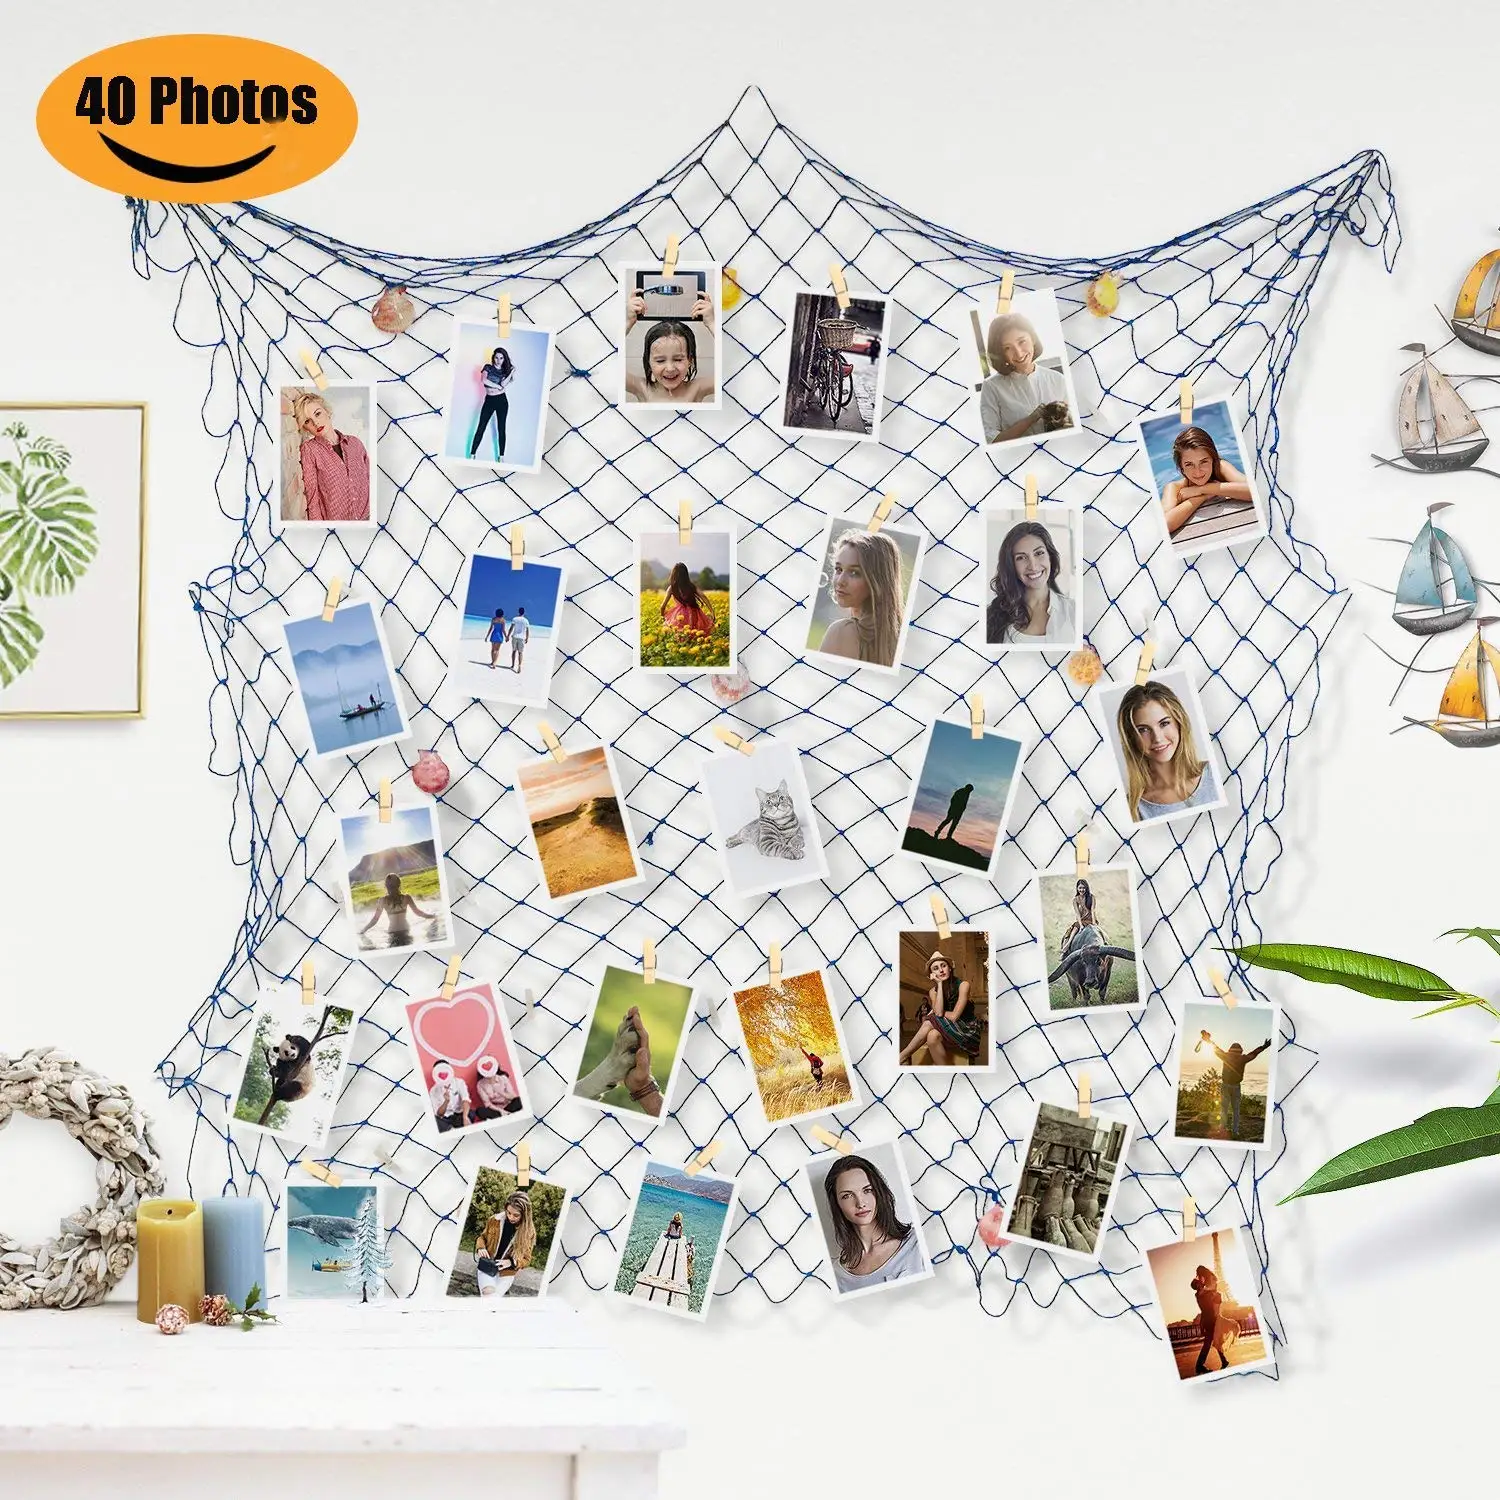 DGQ Photo Hanging Photo Display Frames 79 x 40inch DIY Picture Frames Collage Set Mediterranean Fishing Net Wall Decorations with 40 Clips for Hanging Photos Prints and Artwork